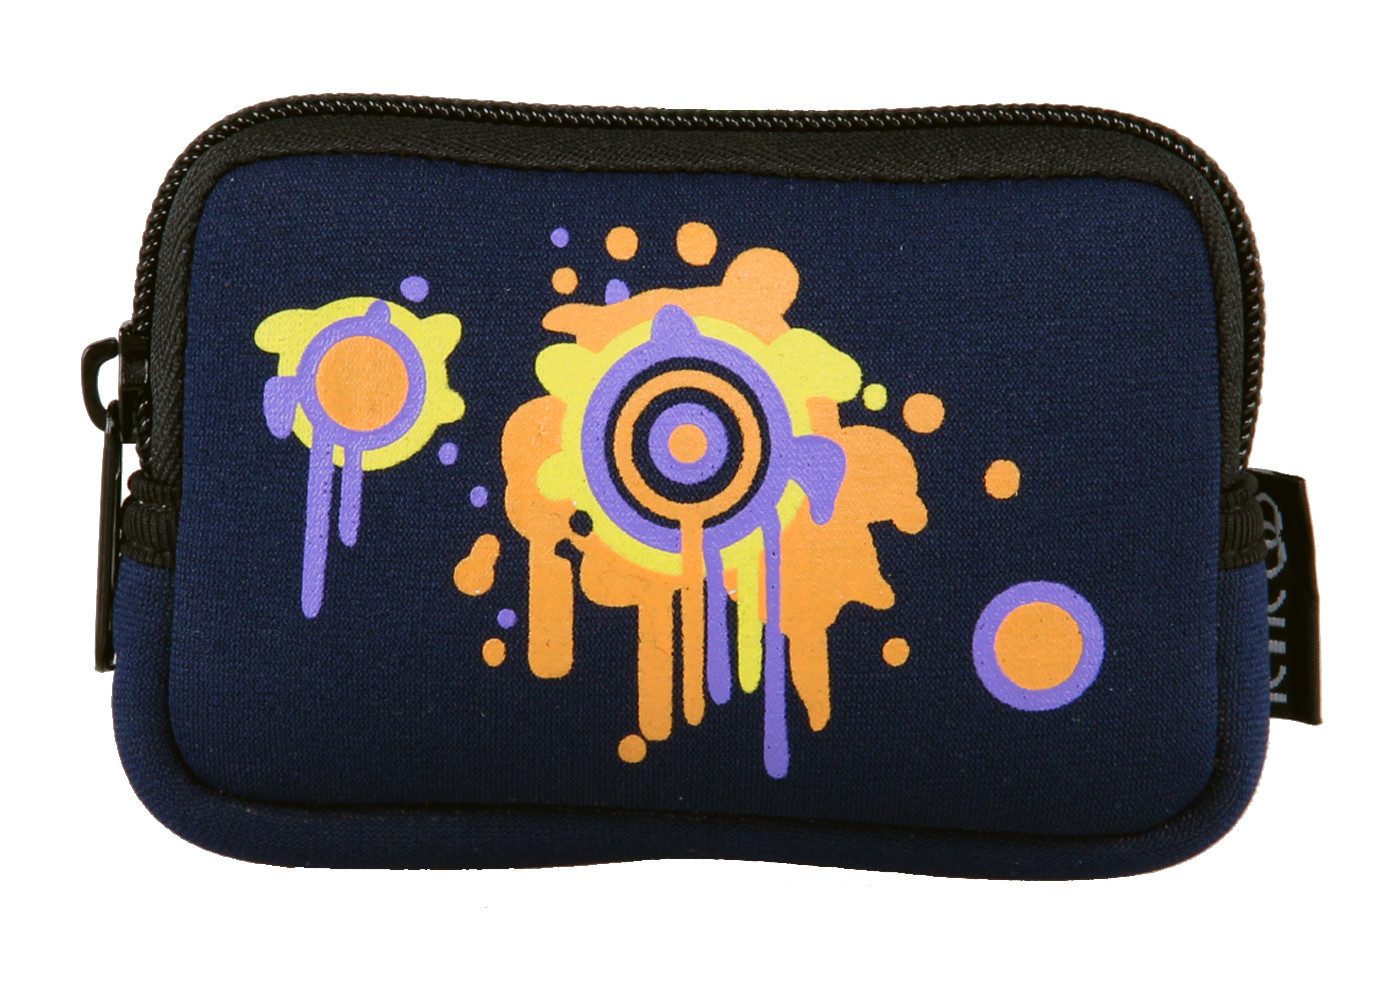 Cheap Environment Friendly Graphic Printing Small Neoprene Pouches Bag for iPad, Ipad 2, Camera for sale